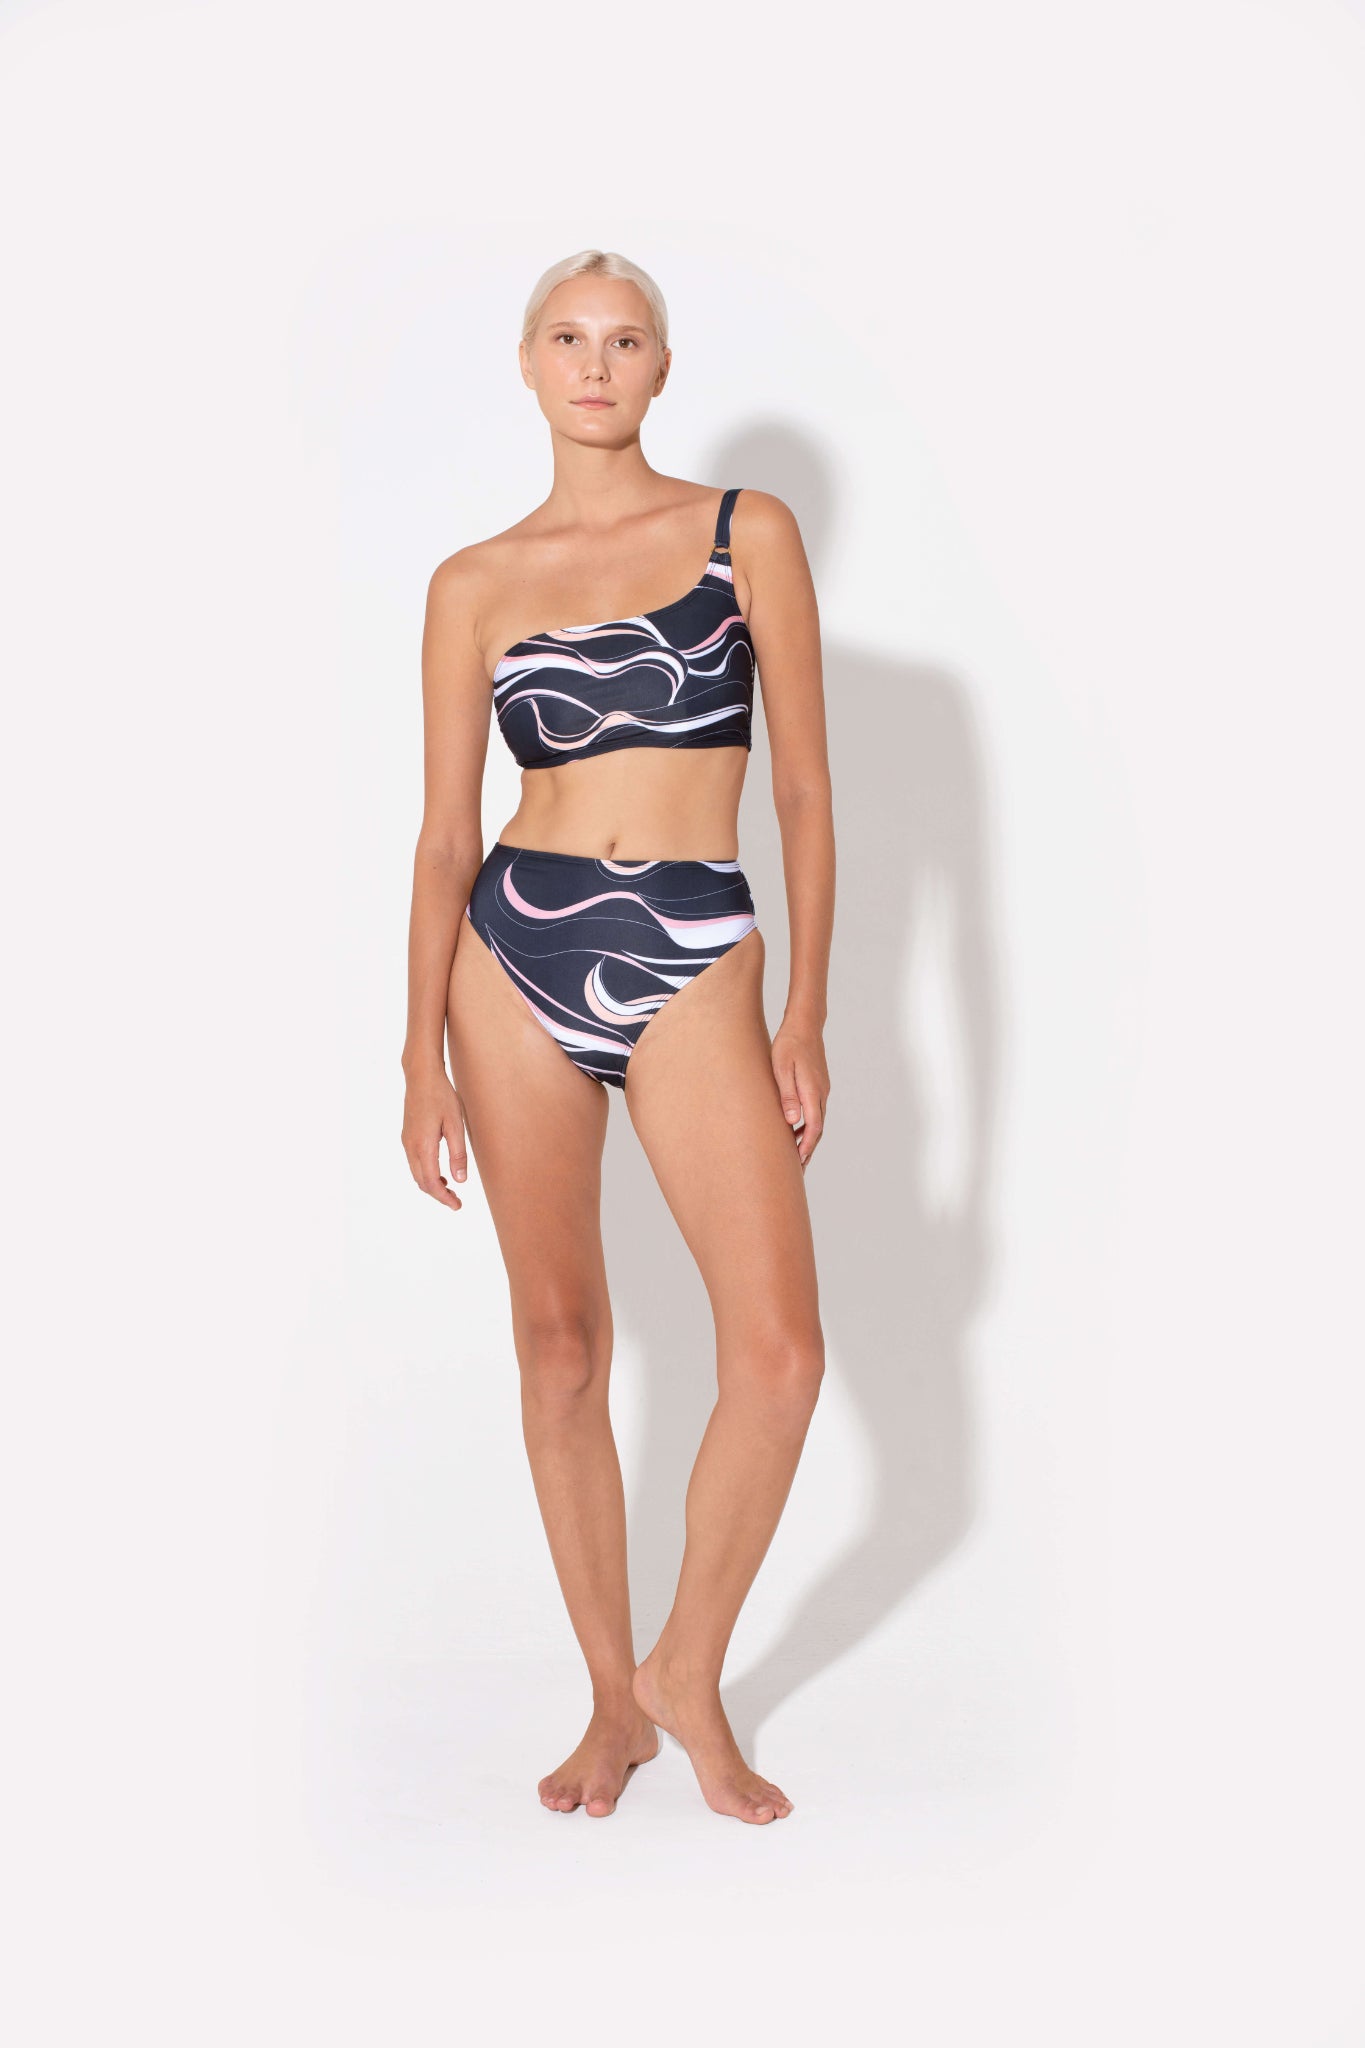 coral print bikinis made from high waist bottoms that flatter the legs and make legs look longer. 